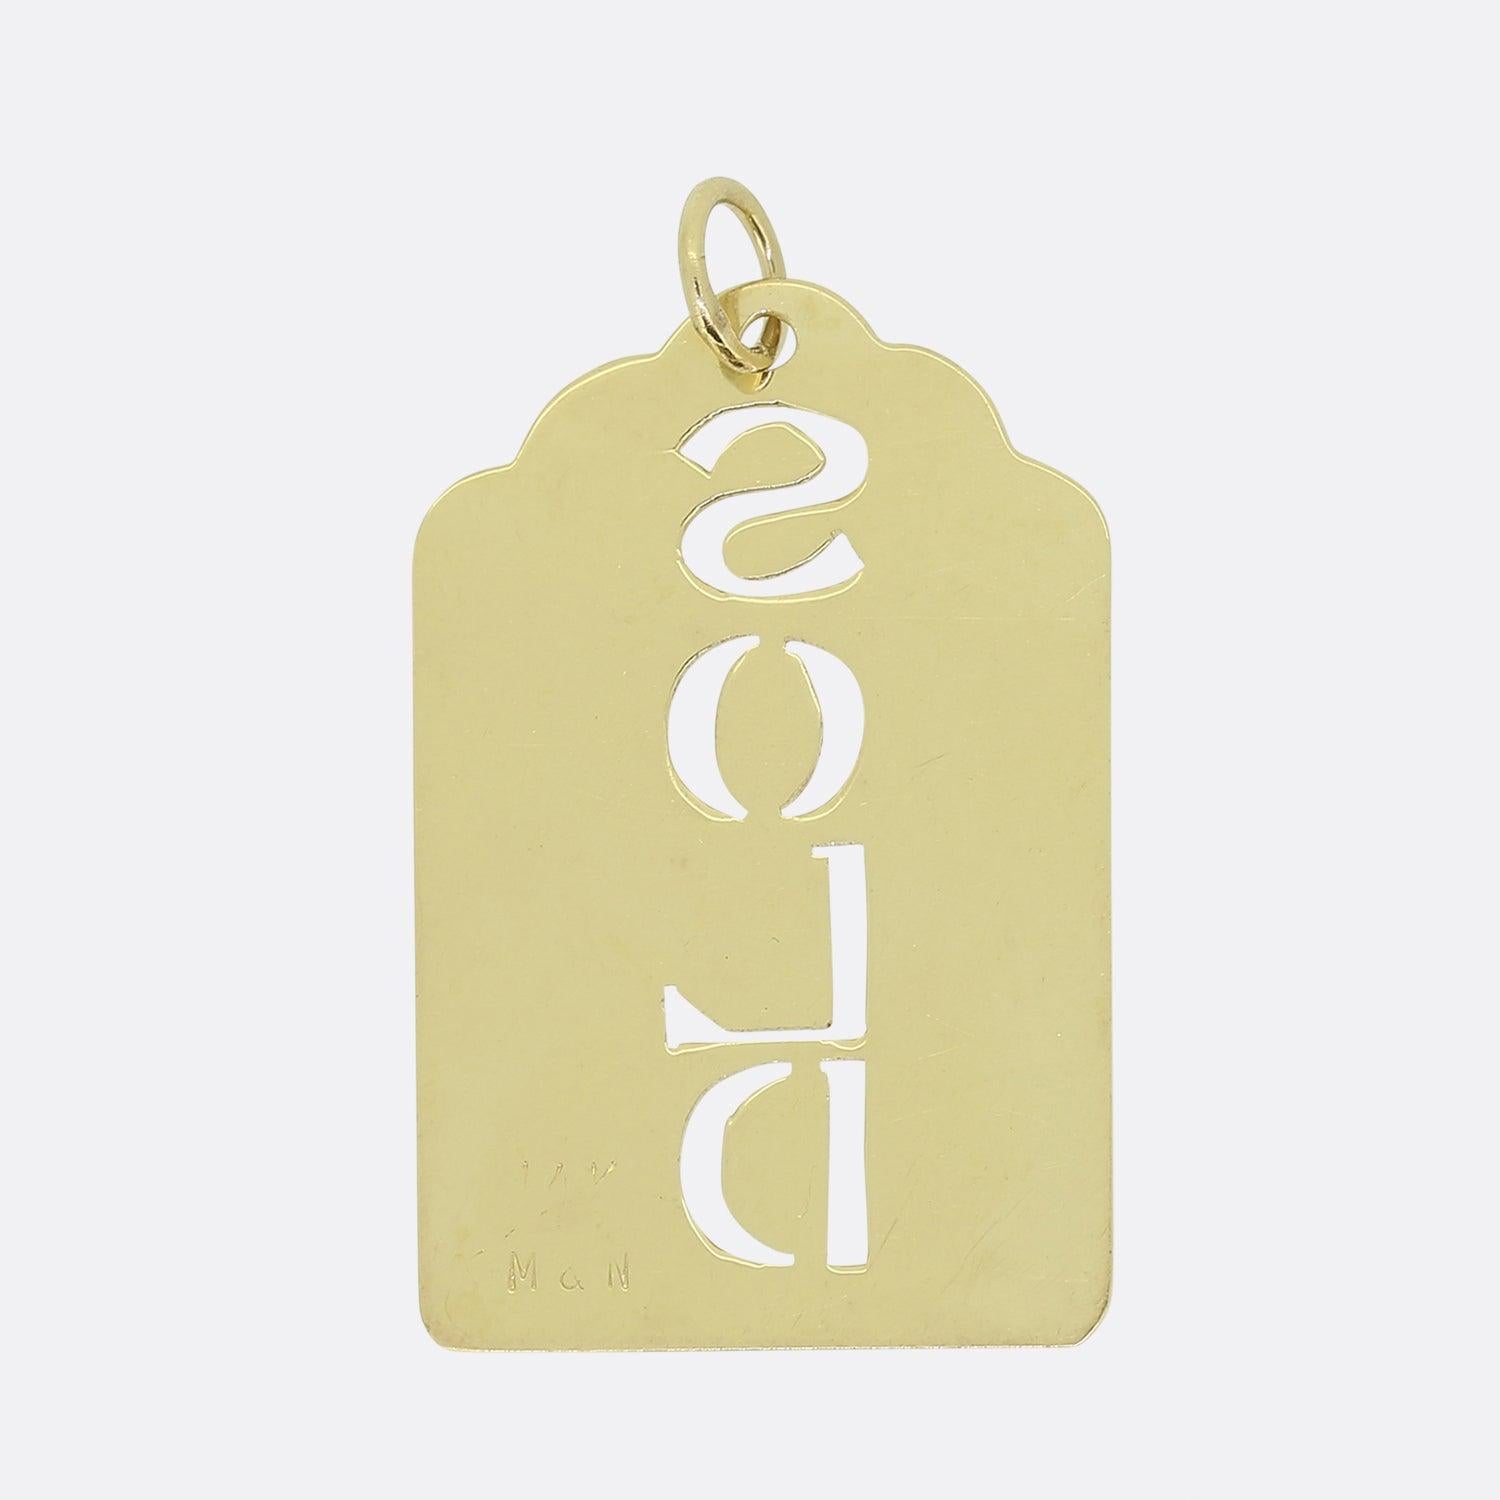 Here we have a classically designed tag pendant. This piece has been crafted from 14ct yellow gold with an expertly pierced mid-section which reads the word 'SOLD'. The rest of piece remains unembellished with a plain polished finish. 

Condition: